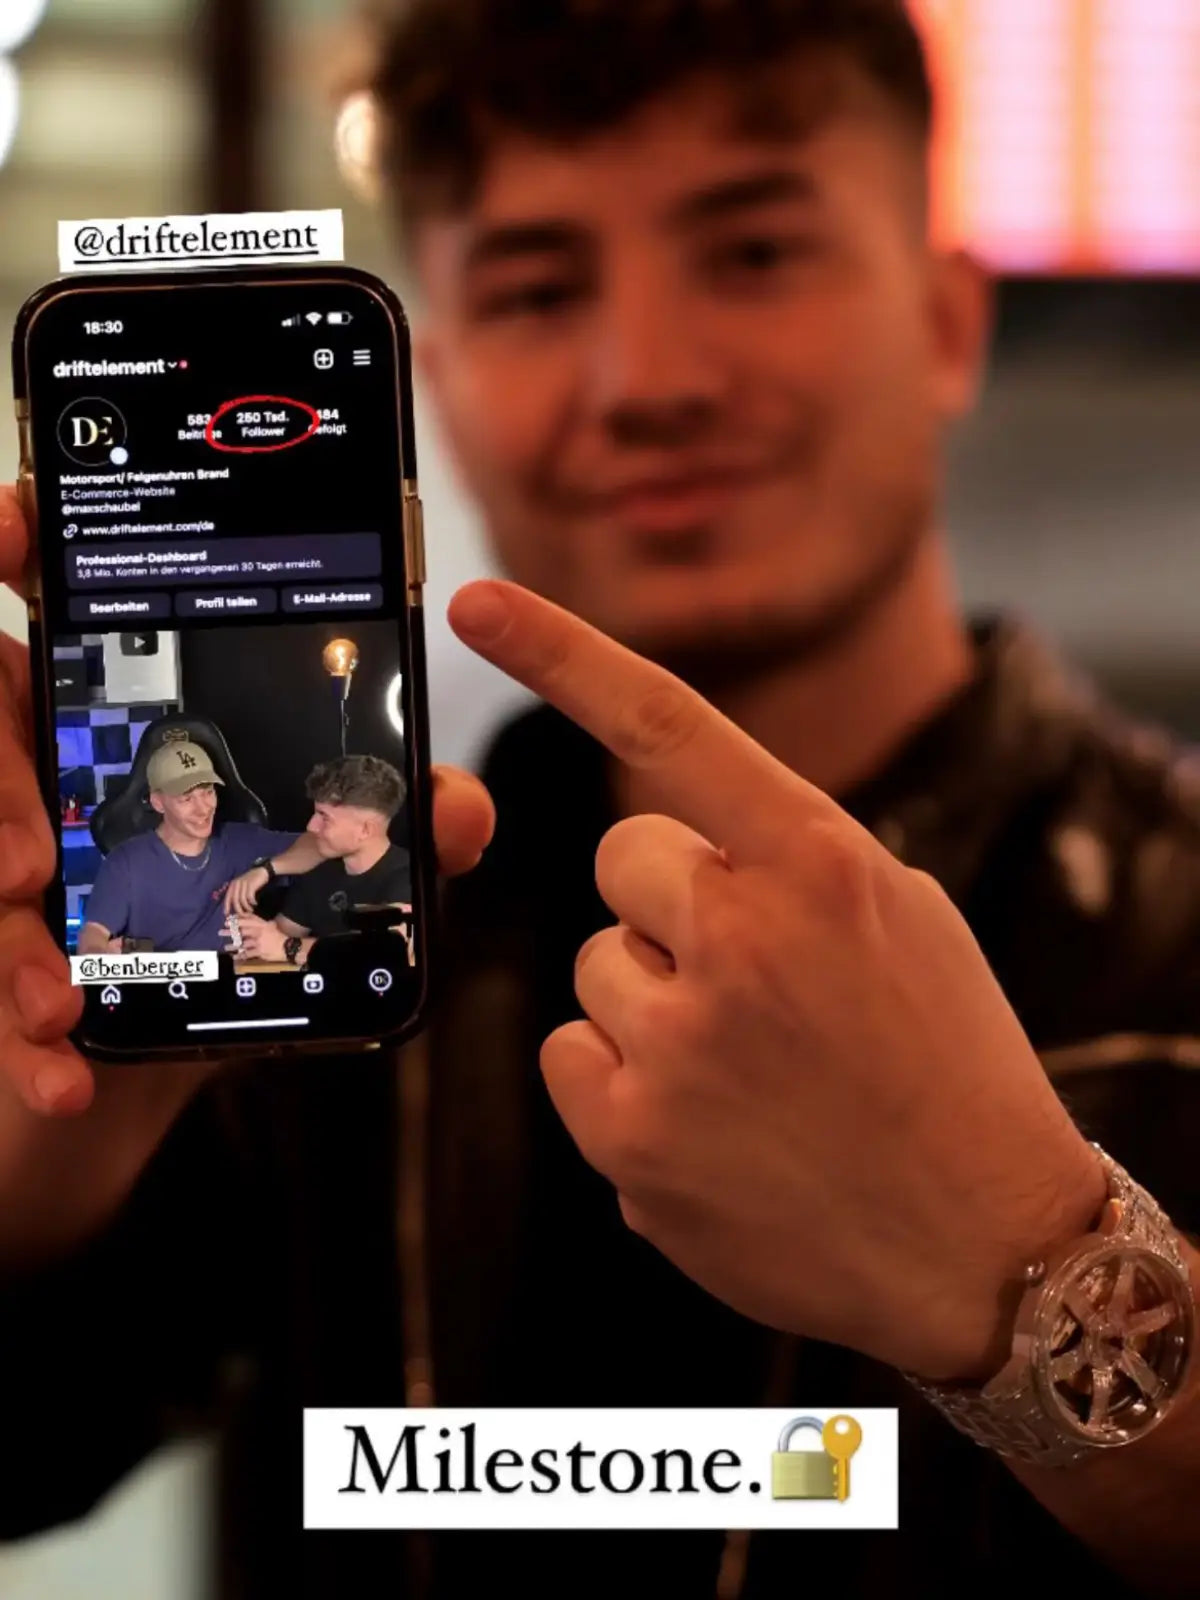 The image shows a young man proudly displaying a smartphone screen with the Instagram profile of @driftelement, a German startup that designs innovative wheel rim-themed watches. On his wrist is one of their watches, featuring the signature rim design, encrusted with what appears to be sparkling gemstones, exemplifying their unique blend of automotive inspiration and luxury. 